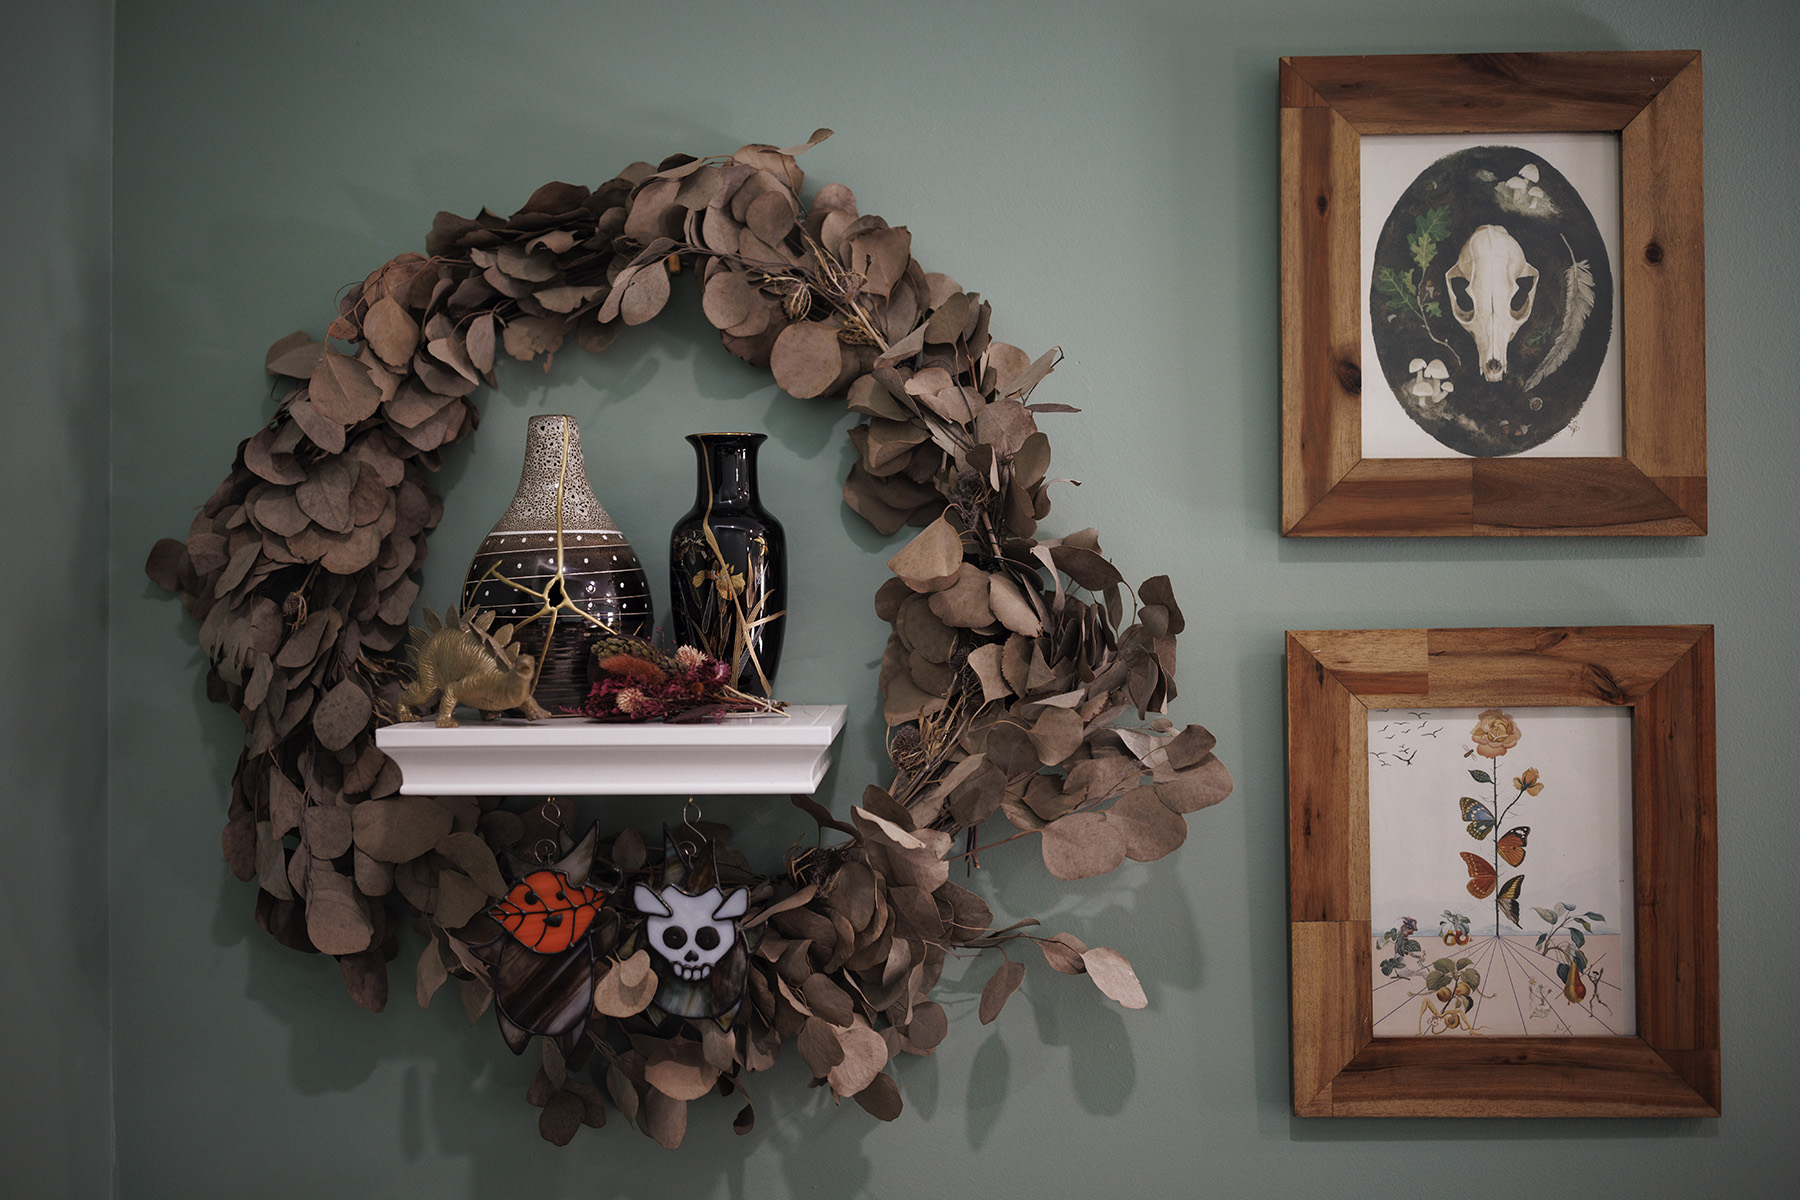 Surrounded by her wedding wreath, urns containing Ann Carver’s son and daughter are seen on a shelf at her home.